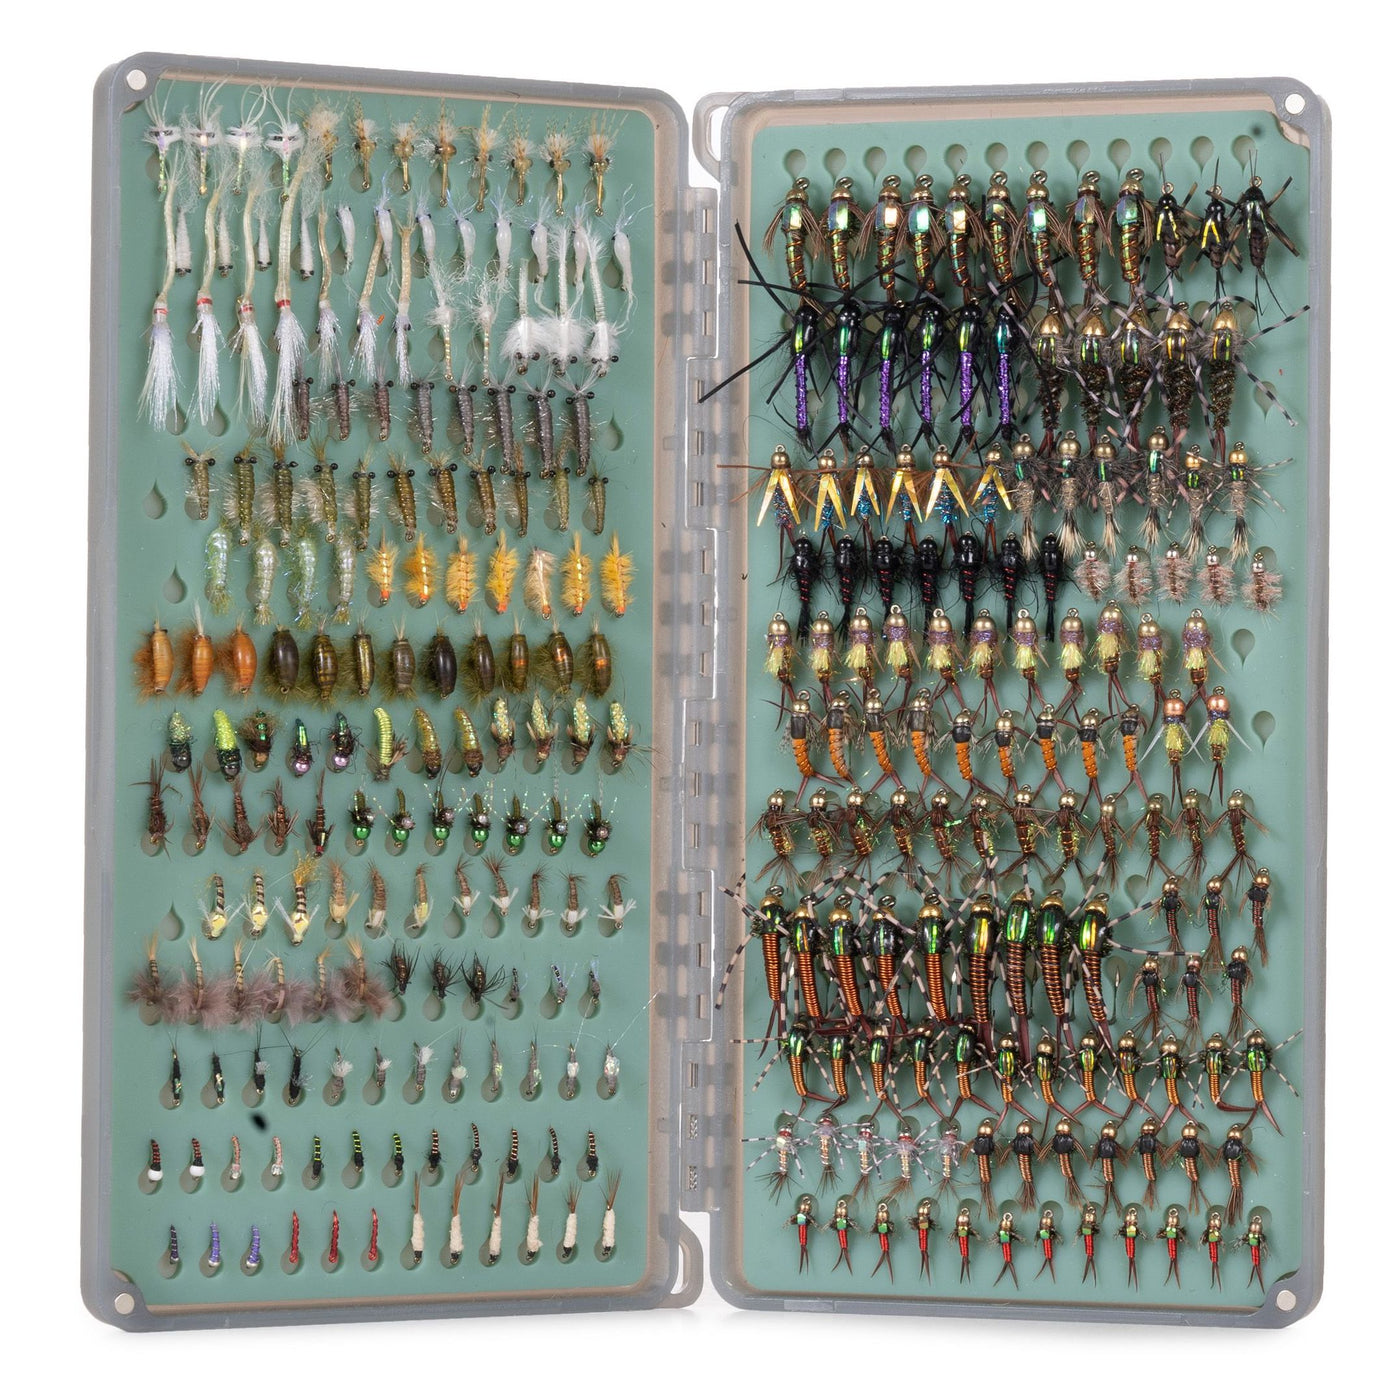 fishpond Tacky Fly Dock 2.0 | Fly Fishing Fly Storage